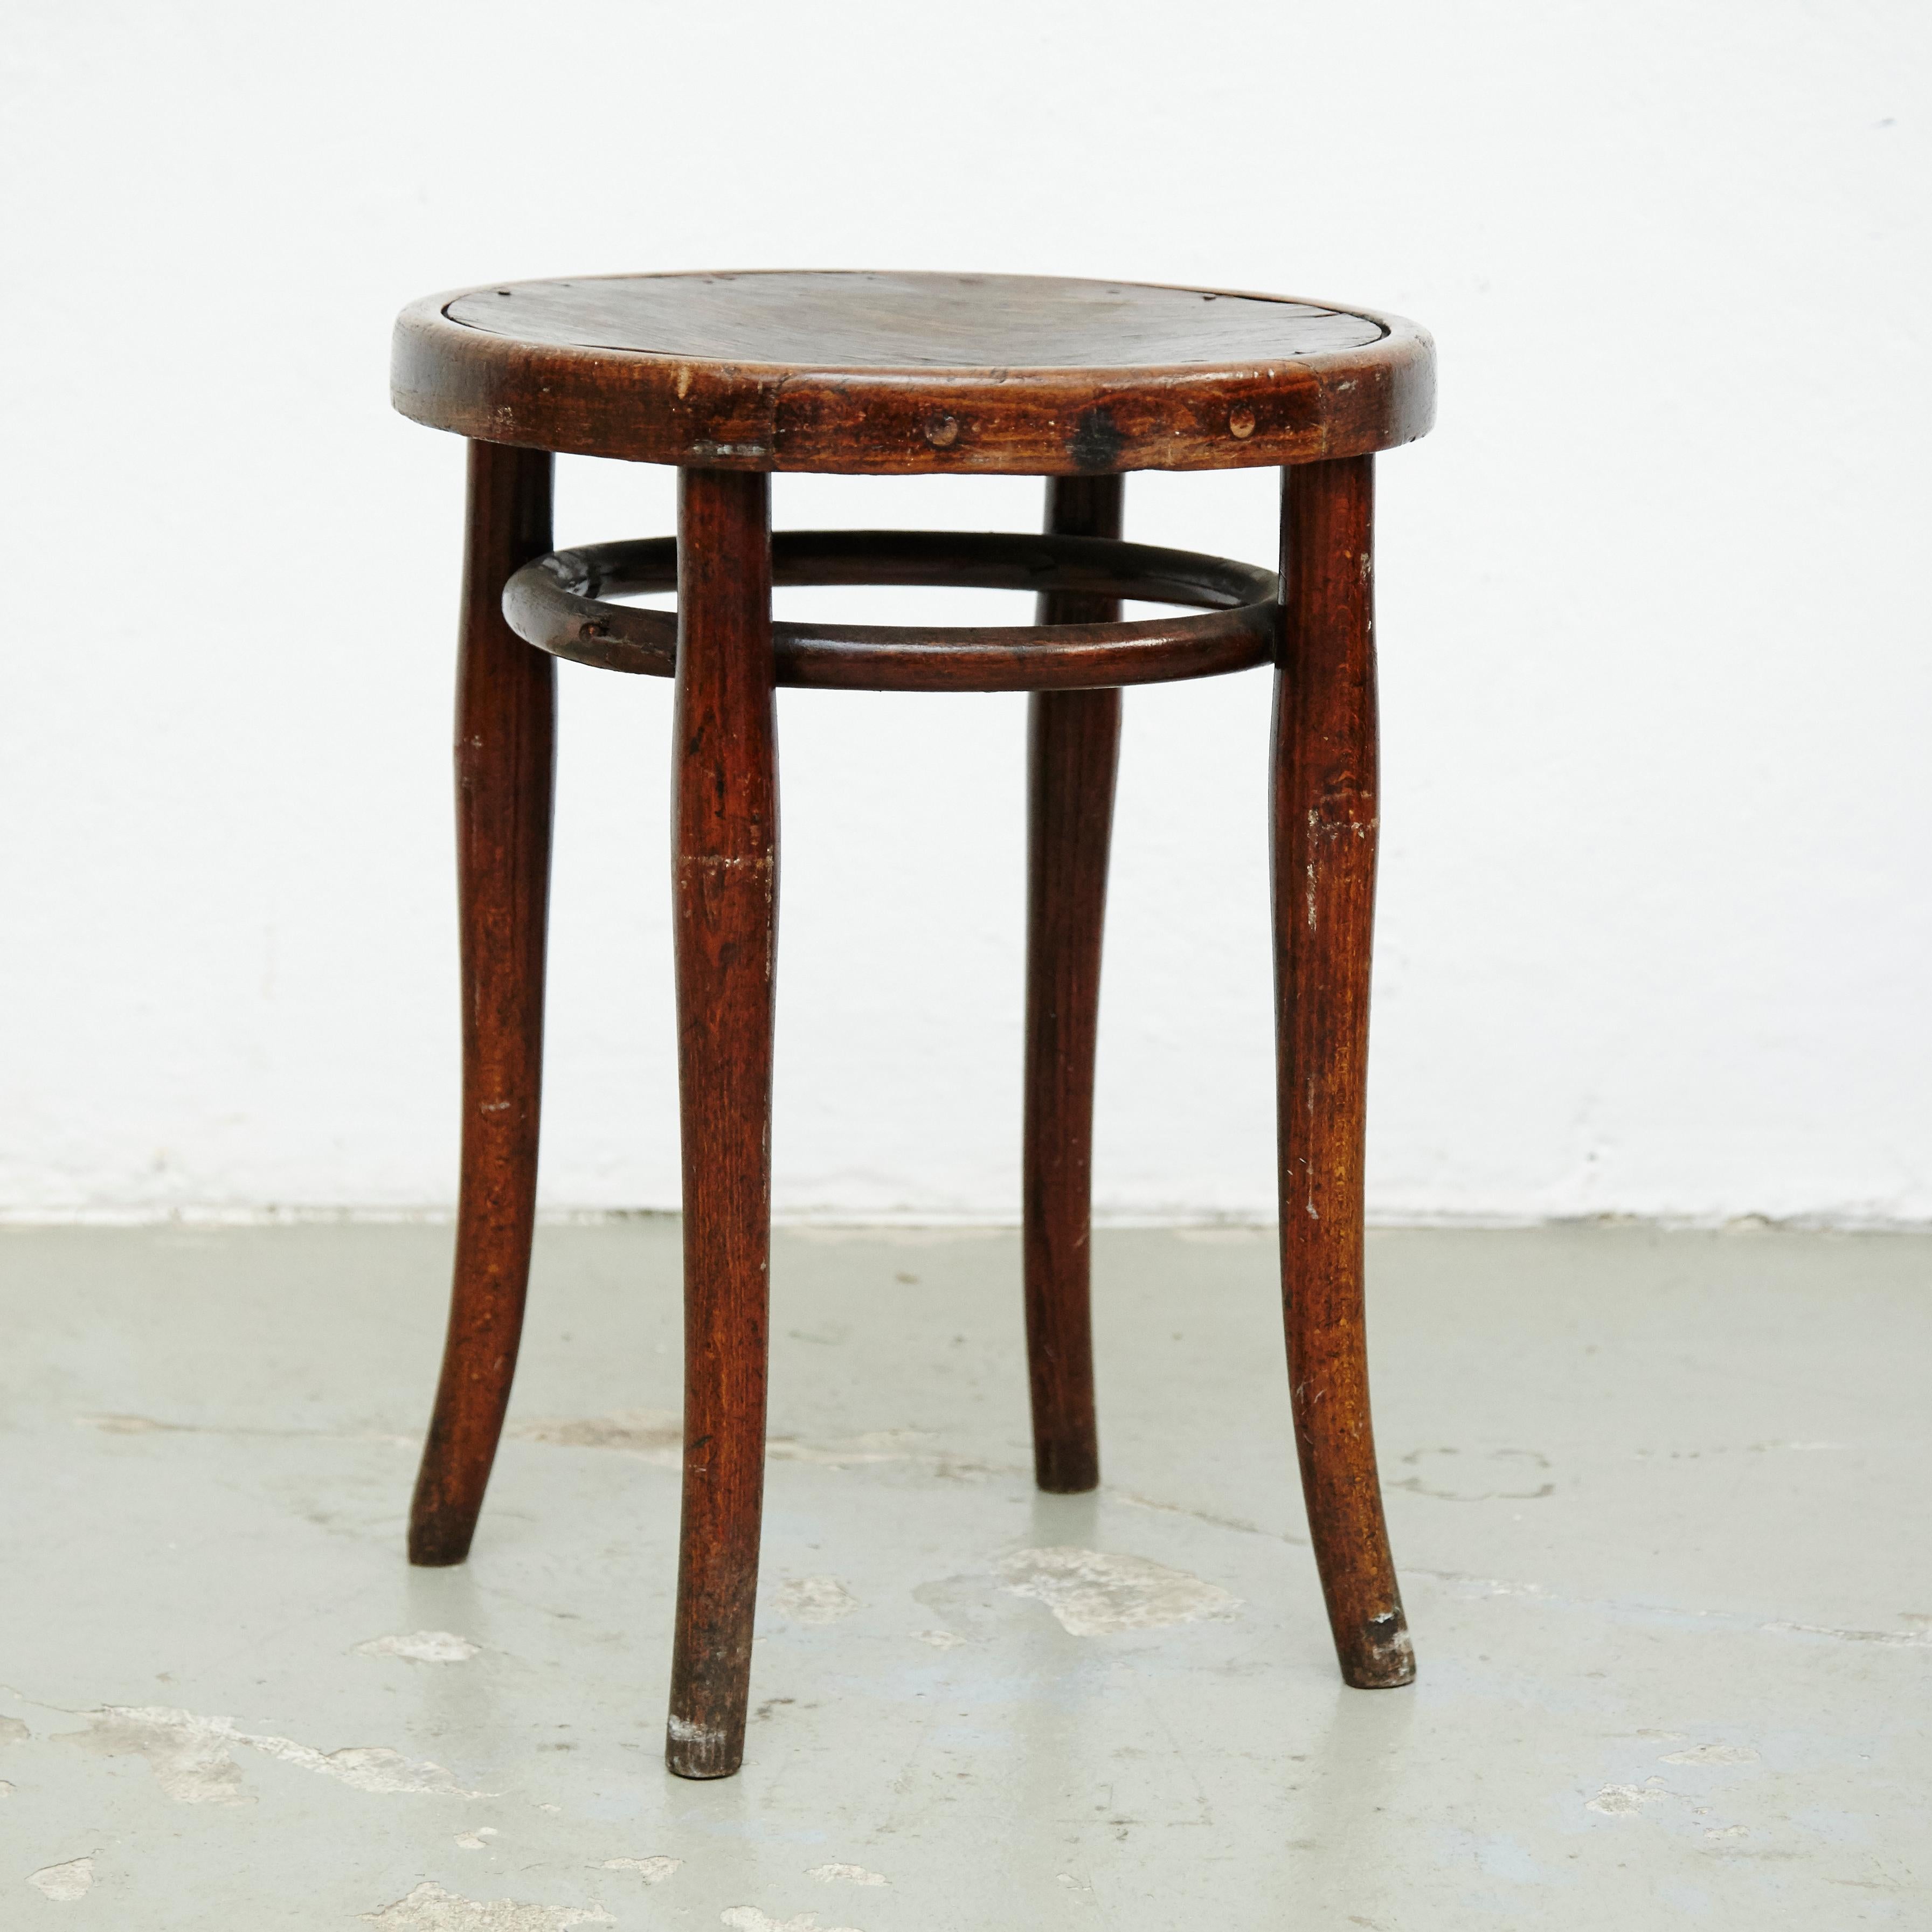 Thonet stool, manufactured by Thonet, circa 1920.

It preserves the original label to the underside.

In good original condition, with minor wear consistent with age and use, preserving a beautiful patina.

Thonet was the son of master tanner